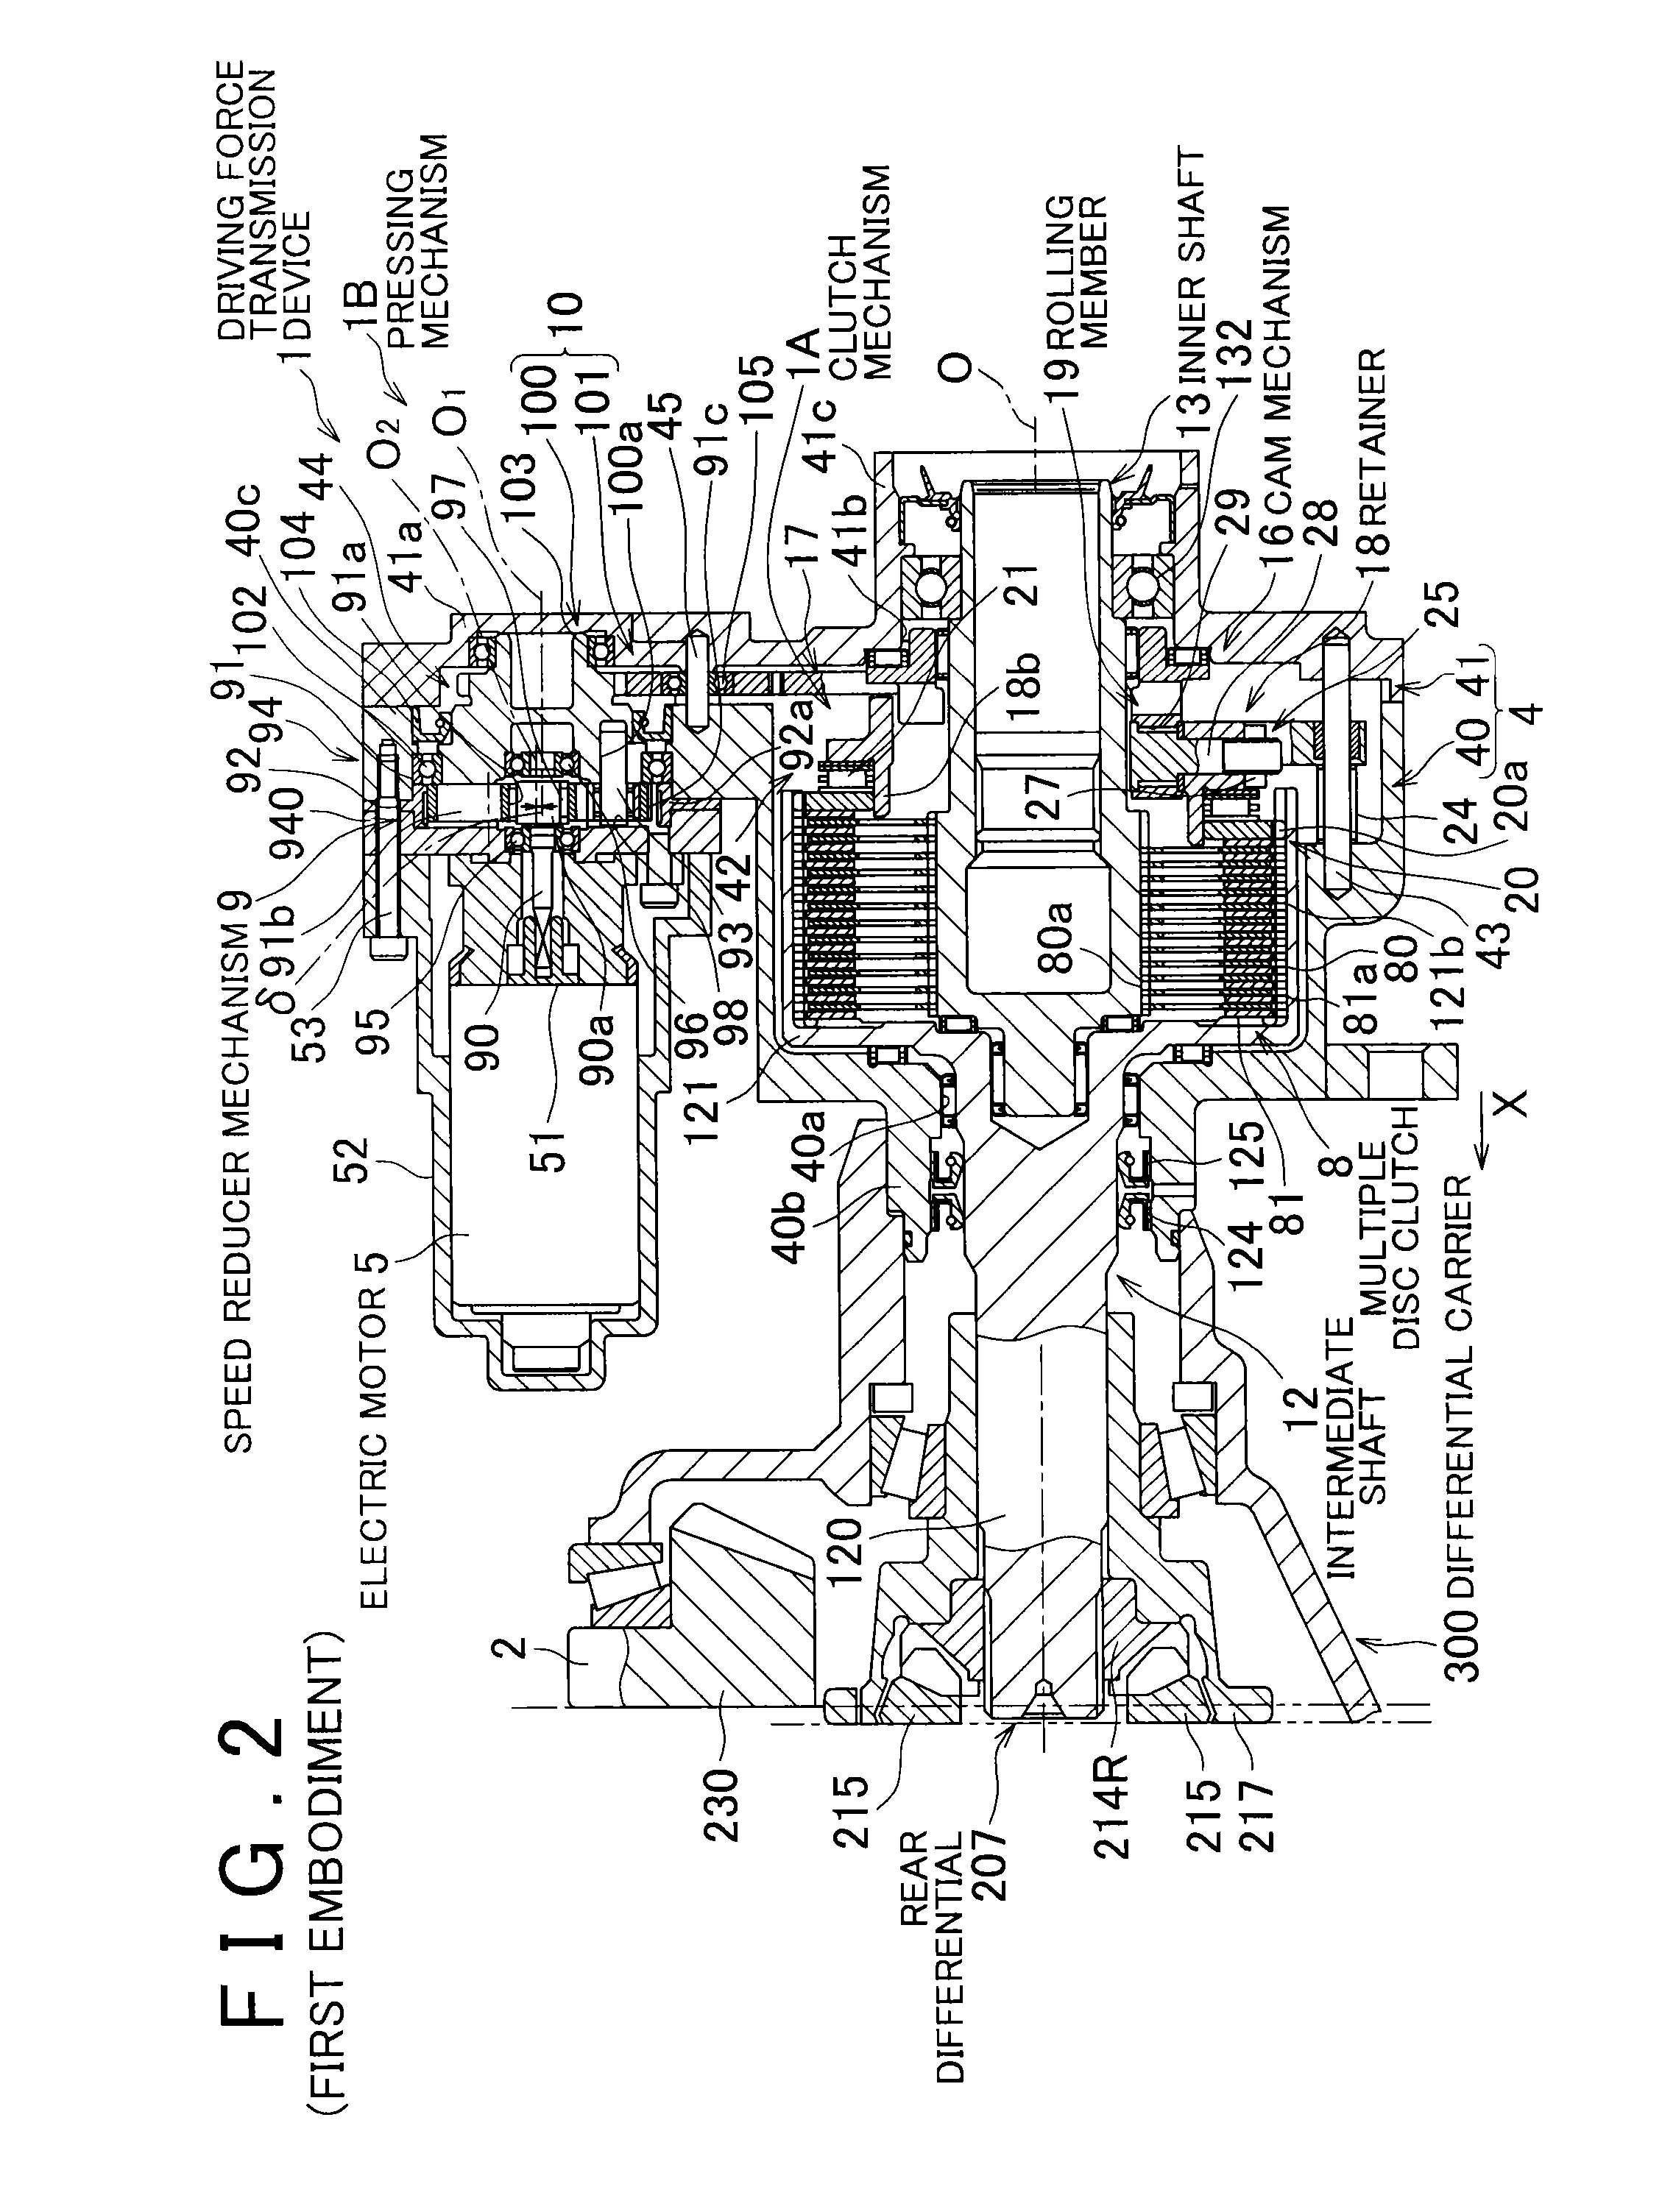 Driving force transmission control apparatus